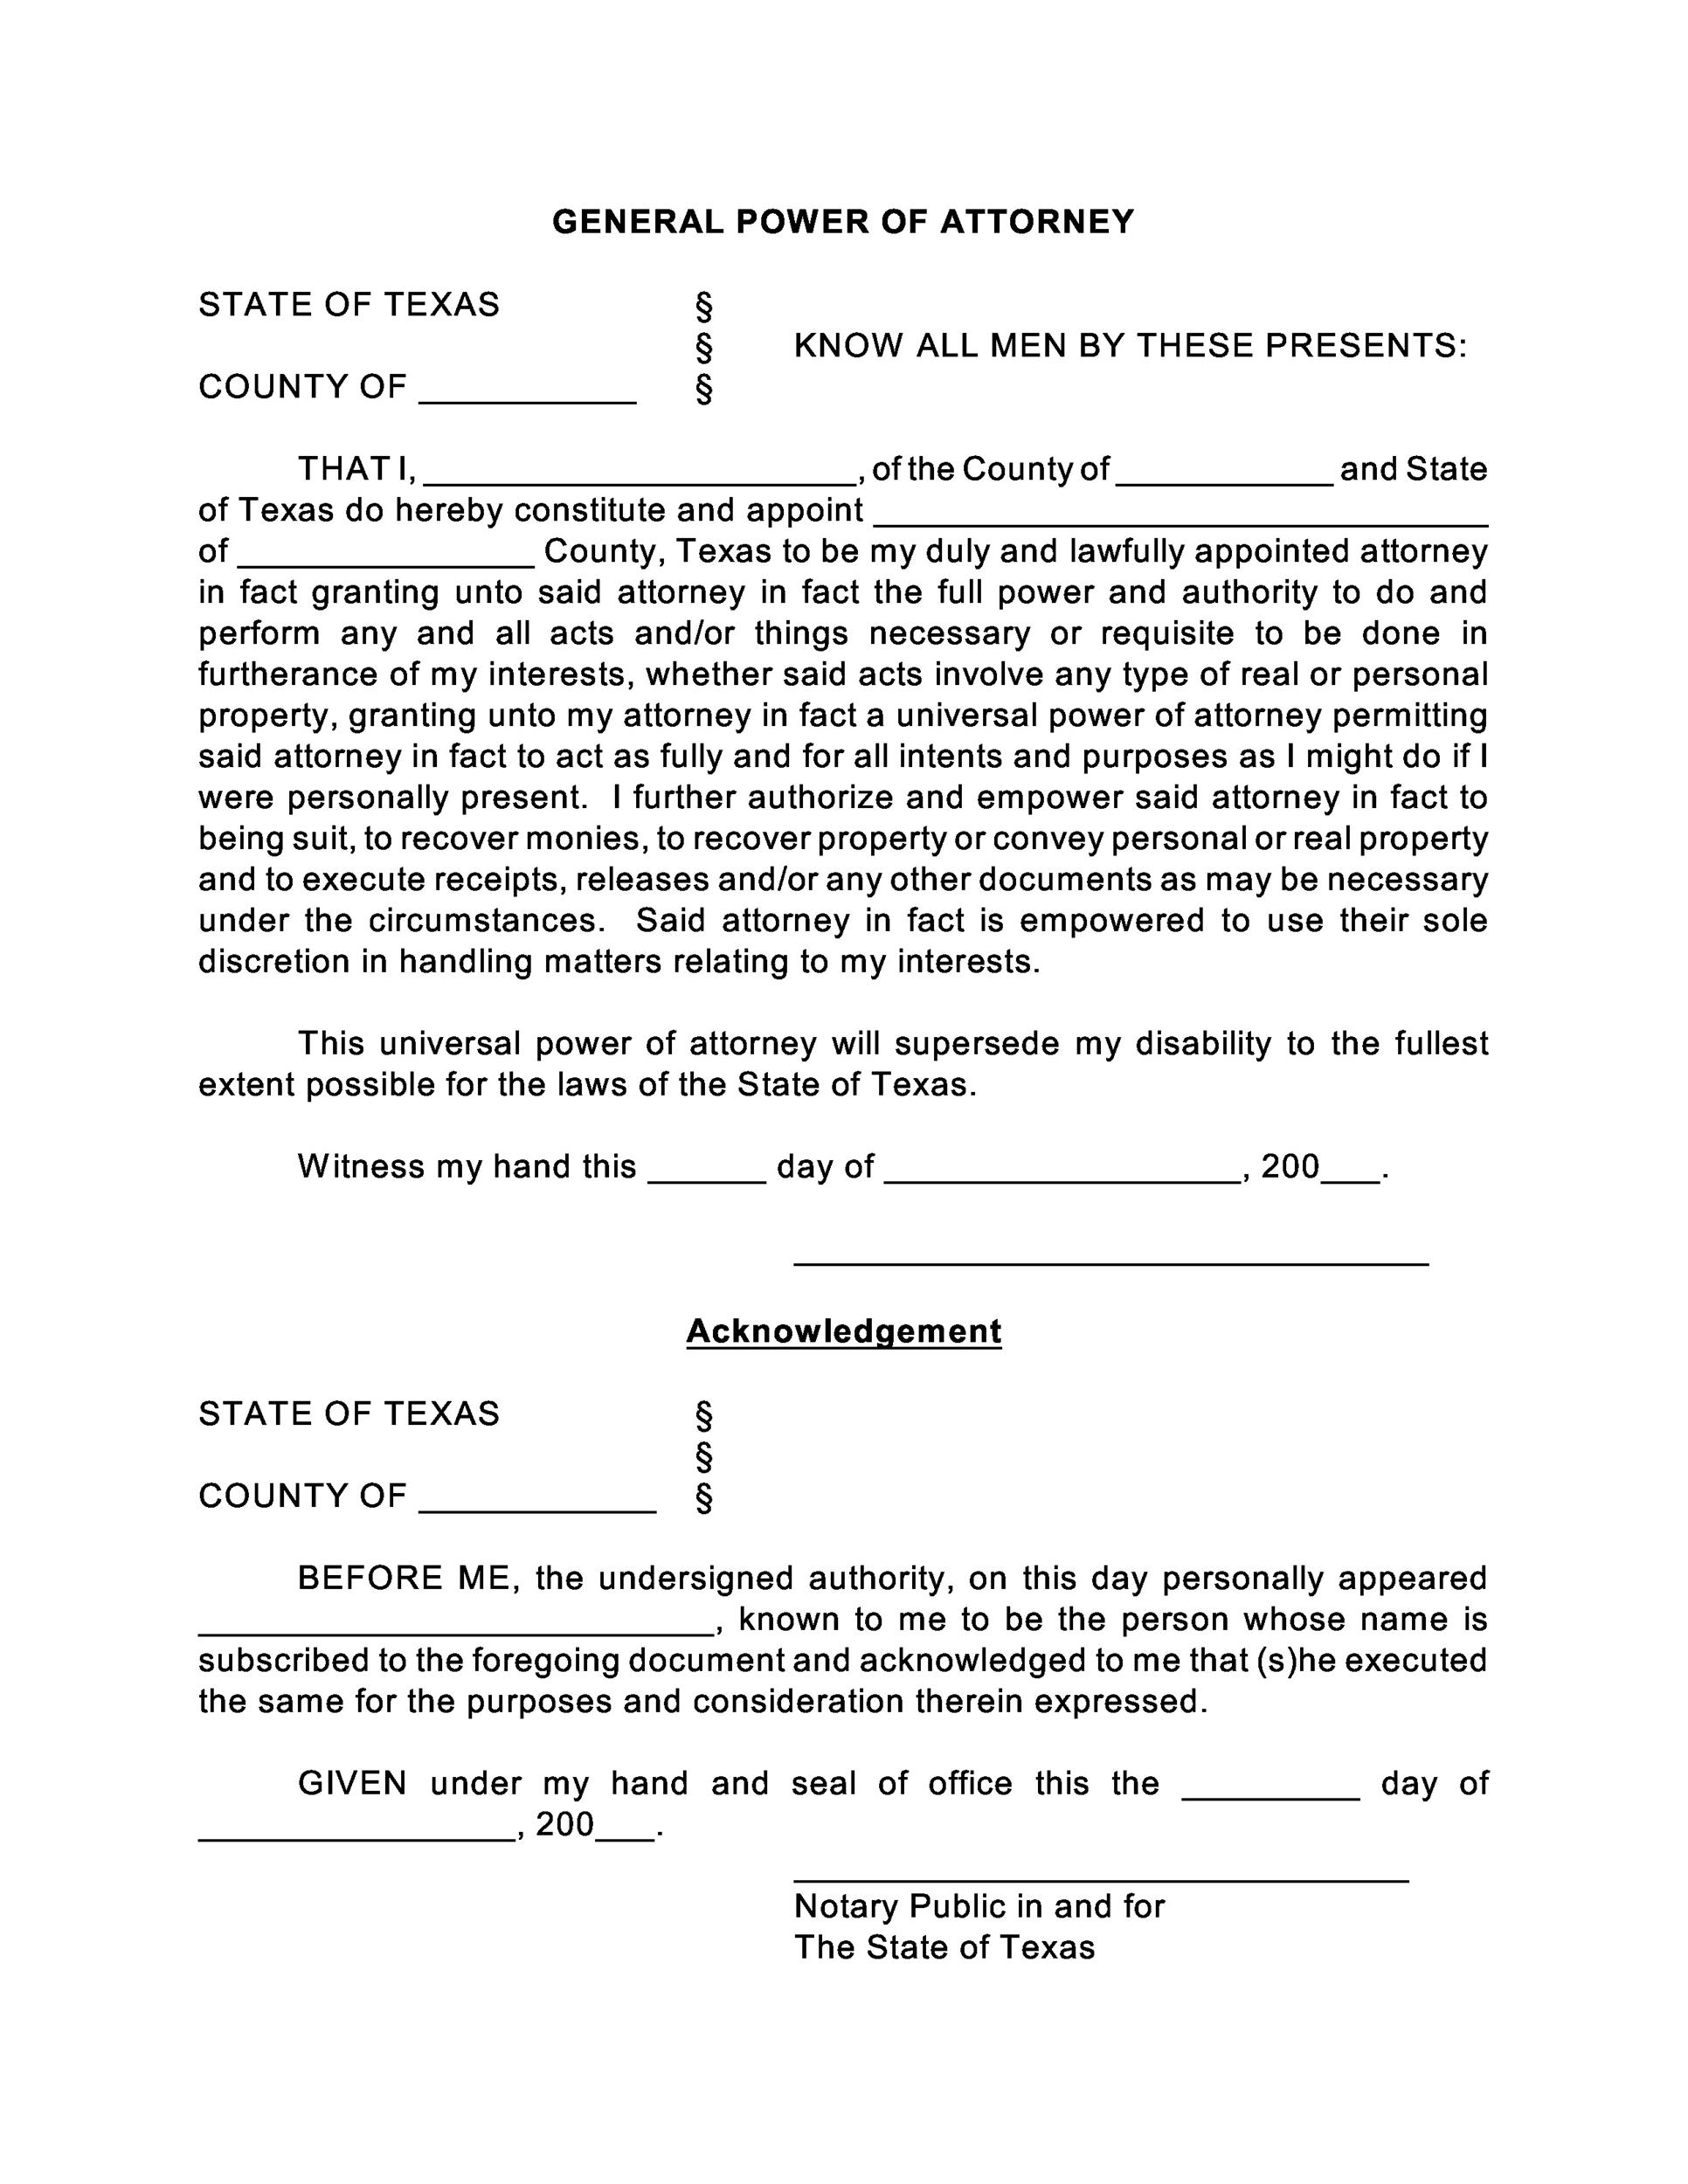 50 Free Power Of Attorney Forms Templates Durable Medical General